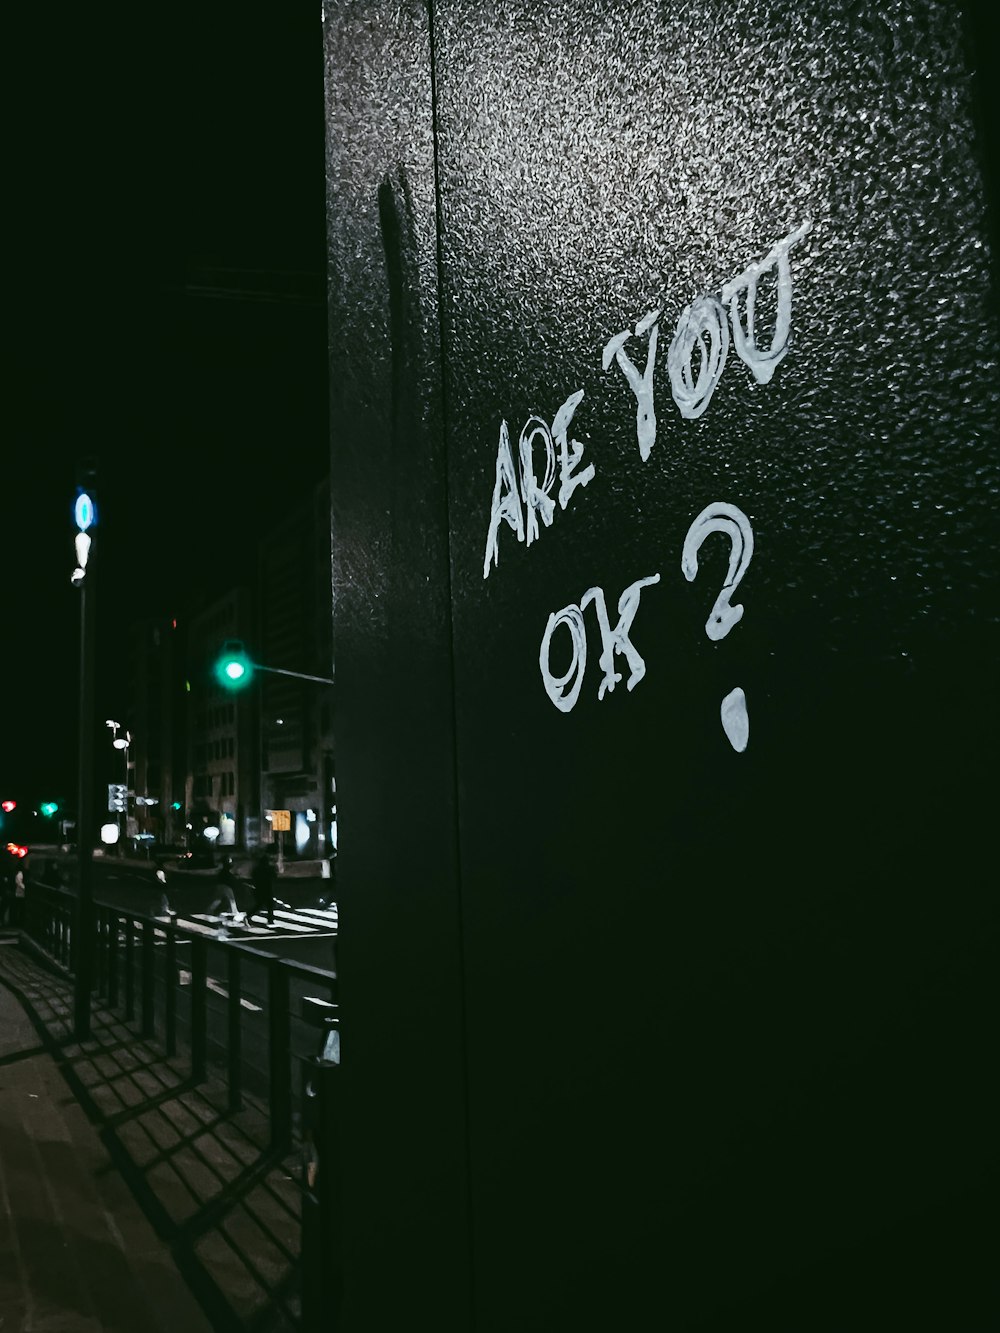 graffiti on the side of a building that says are you ok?